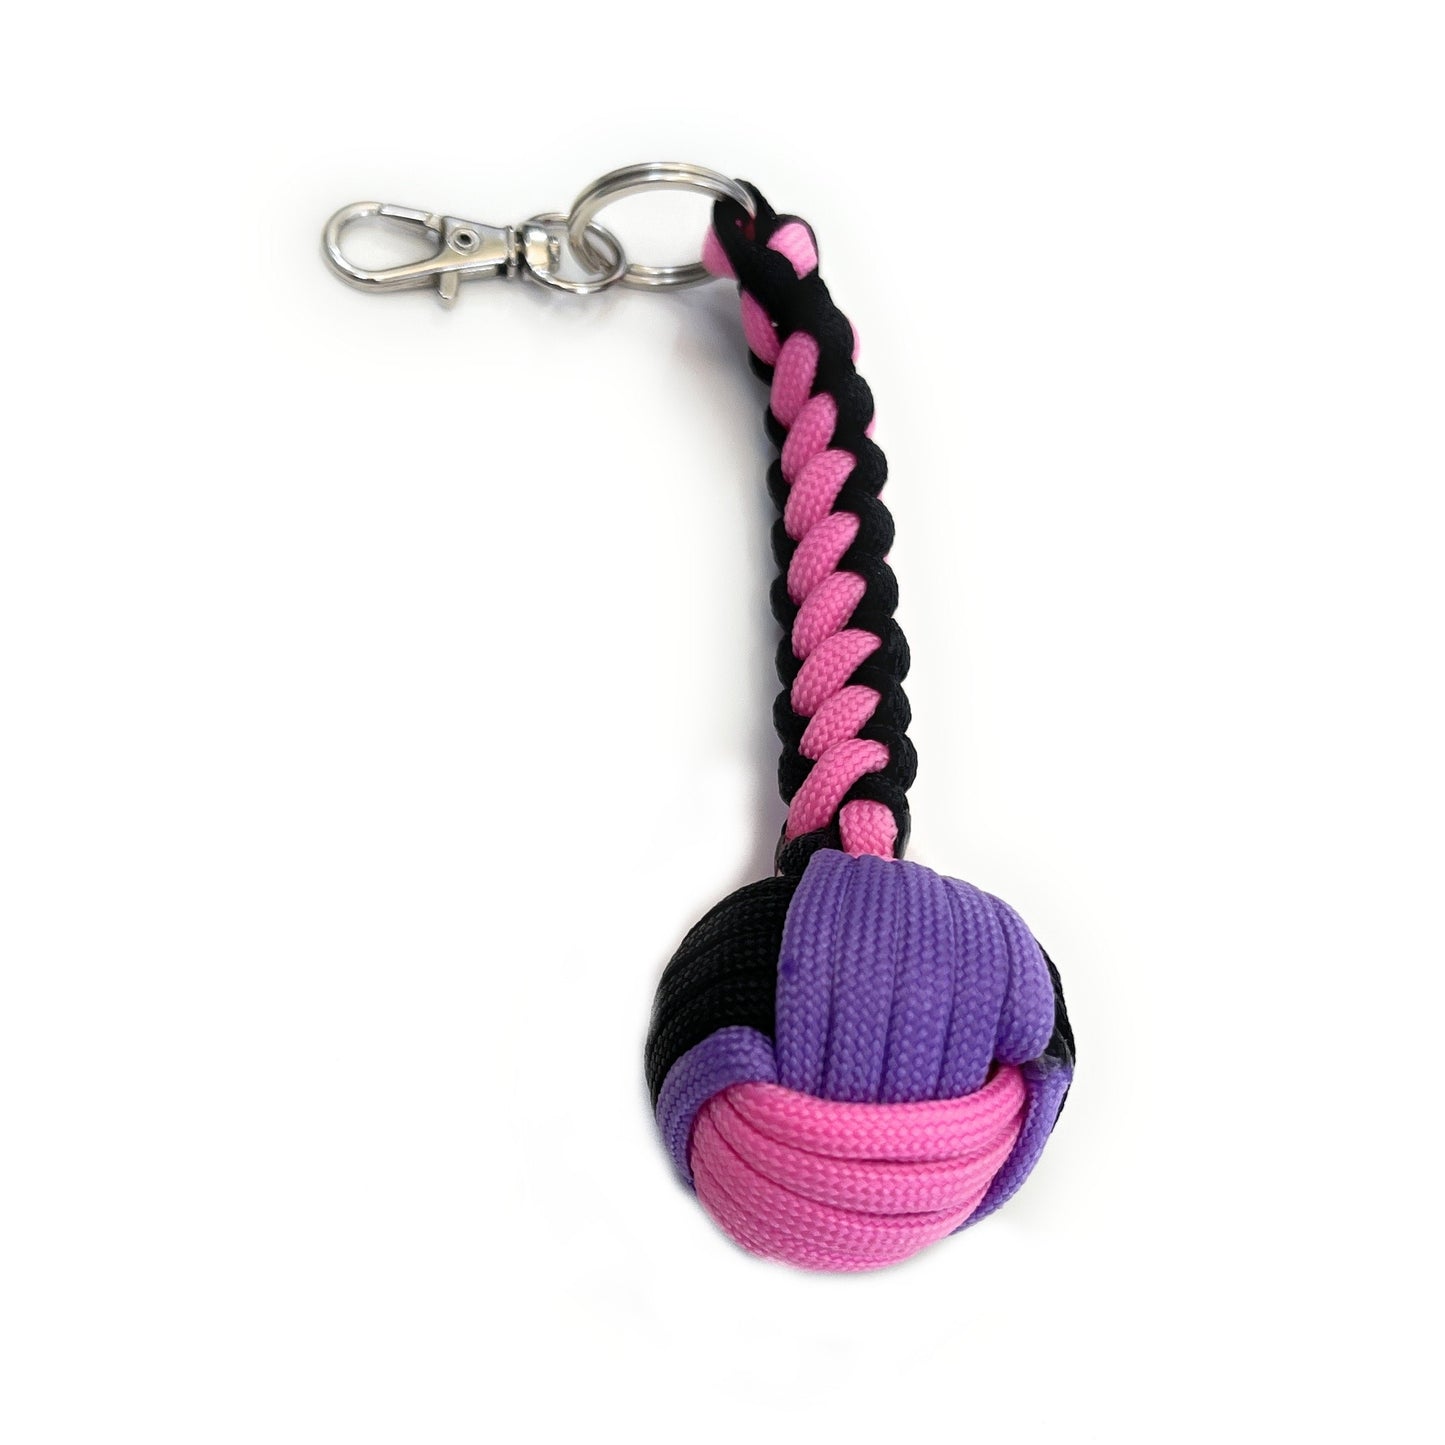 Create Your Own Paracord Survival Ball Bearing Key Chain